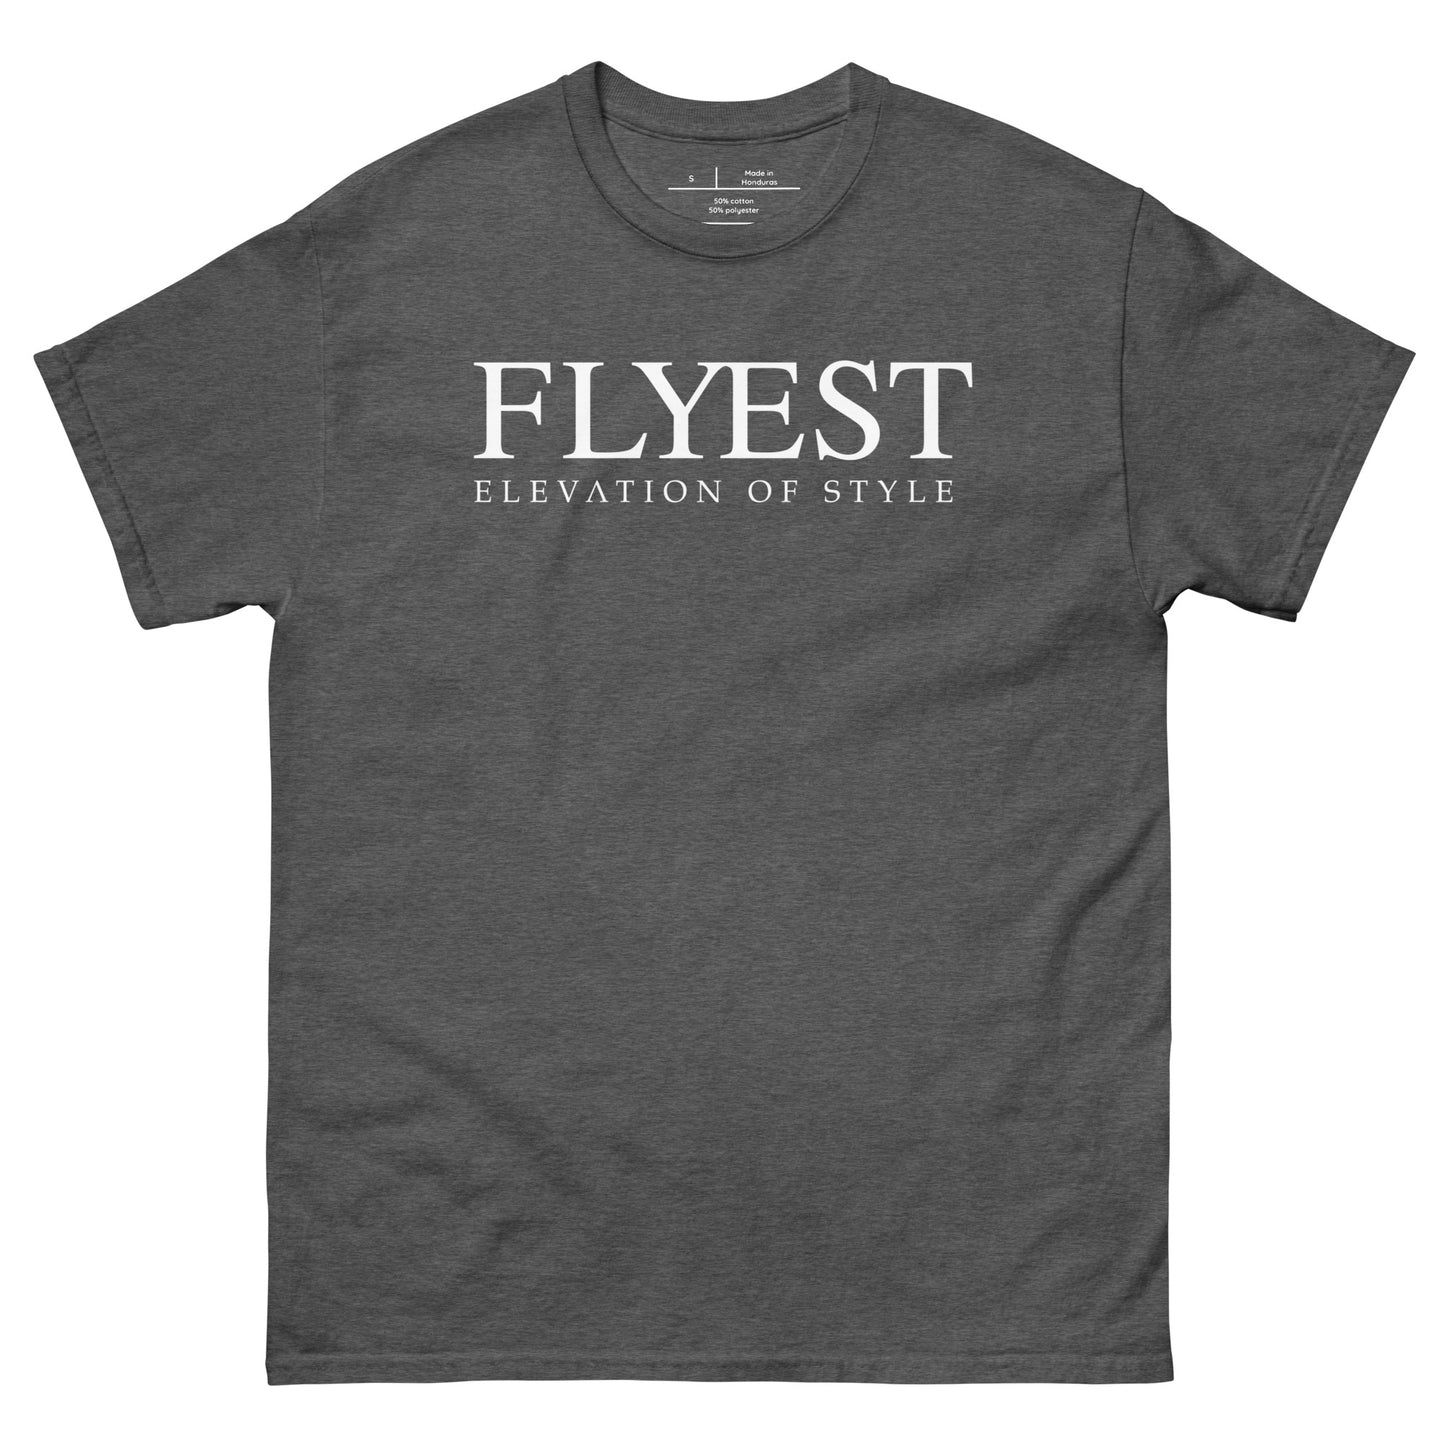 Flyest Elevation of Style tee